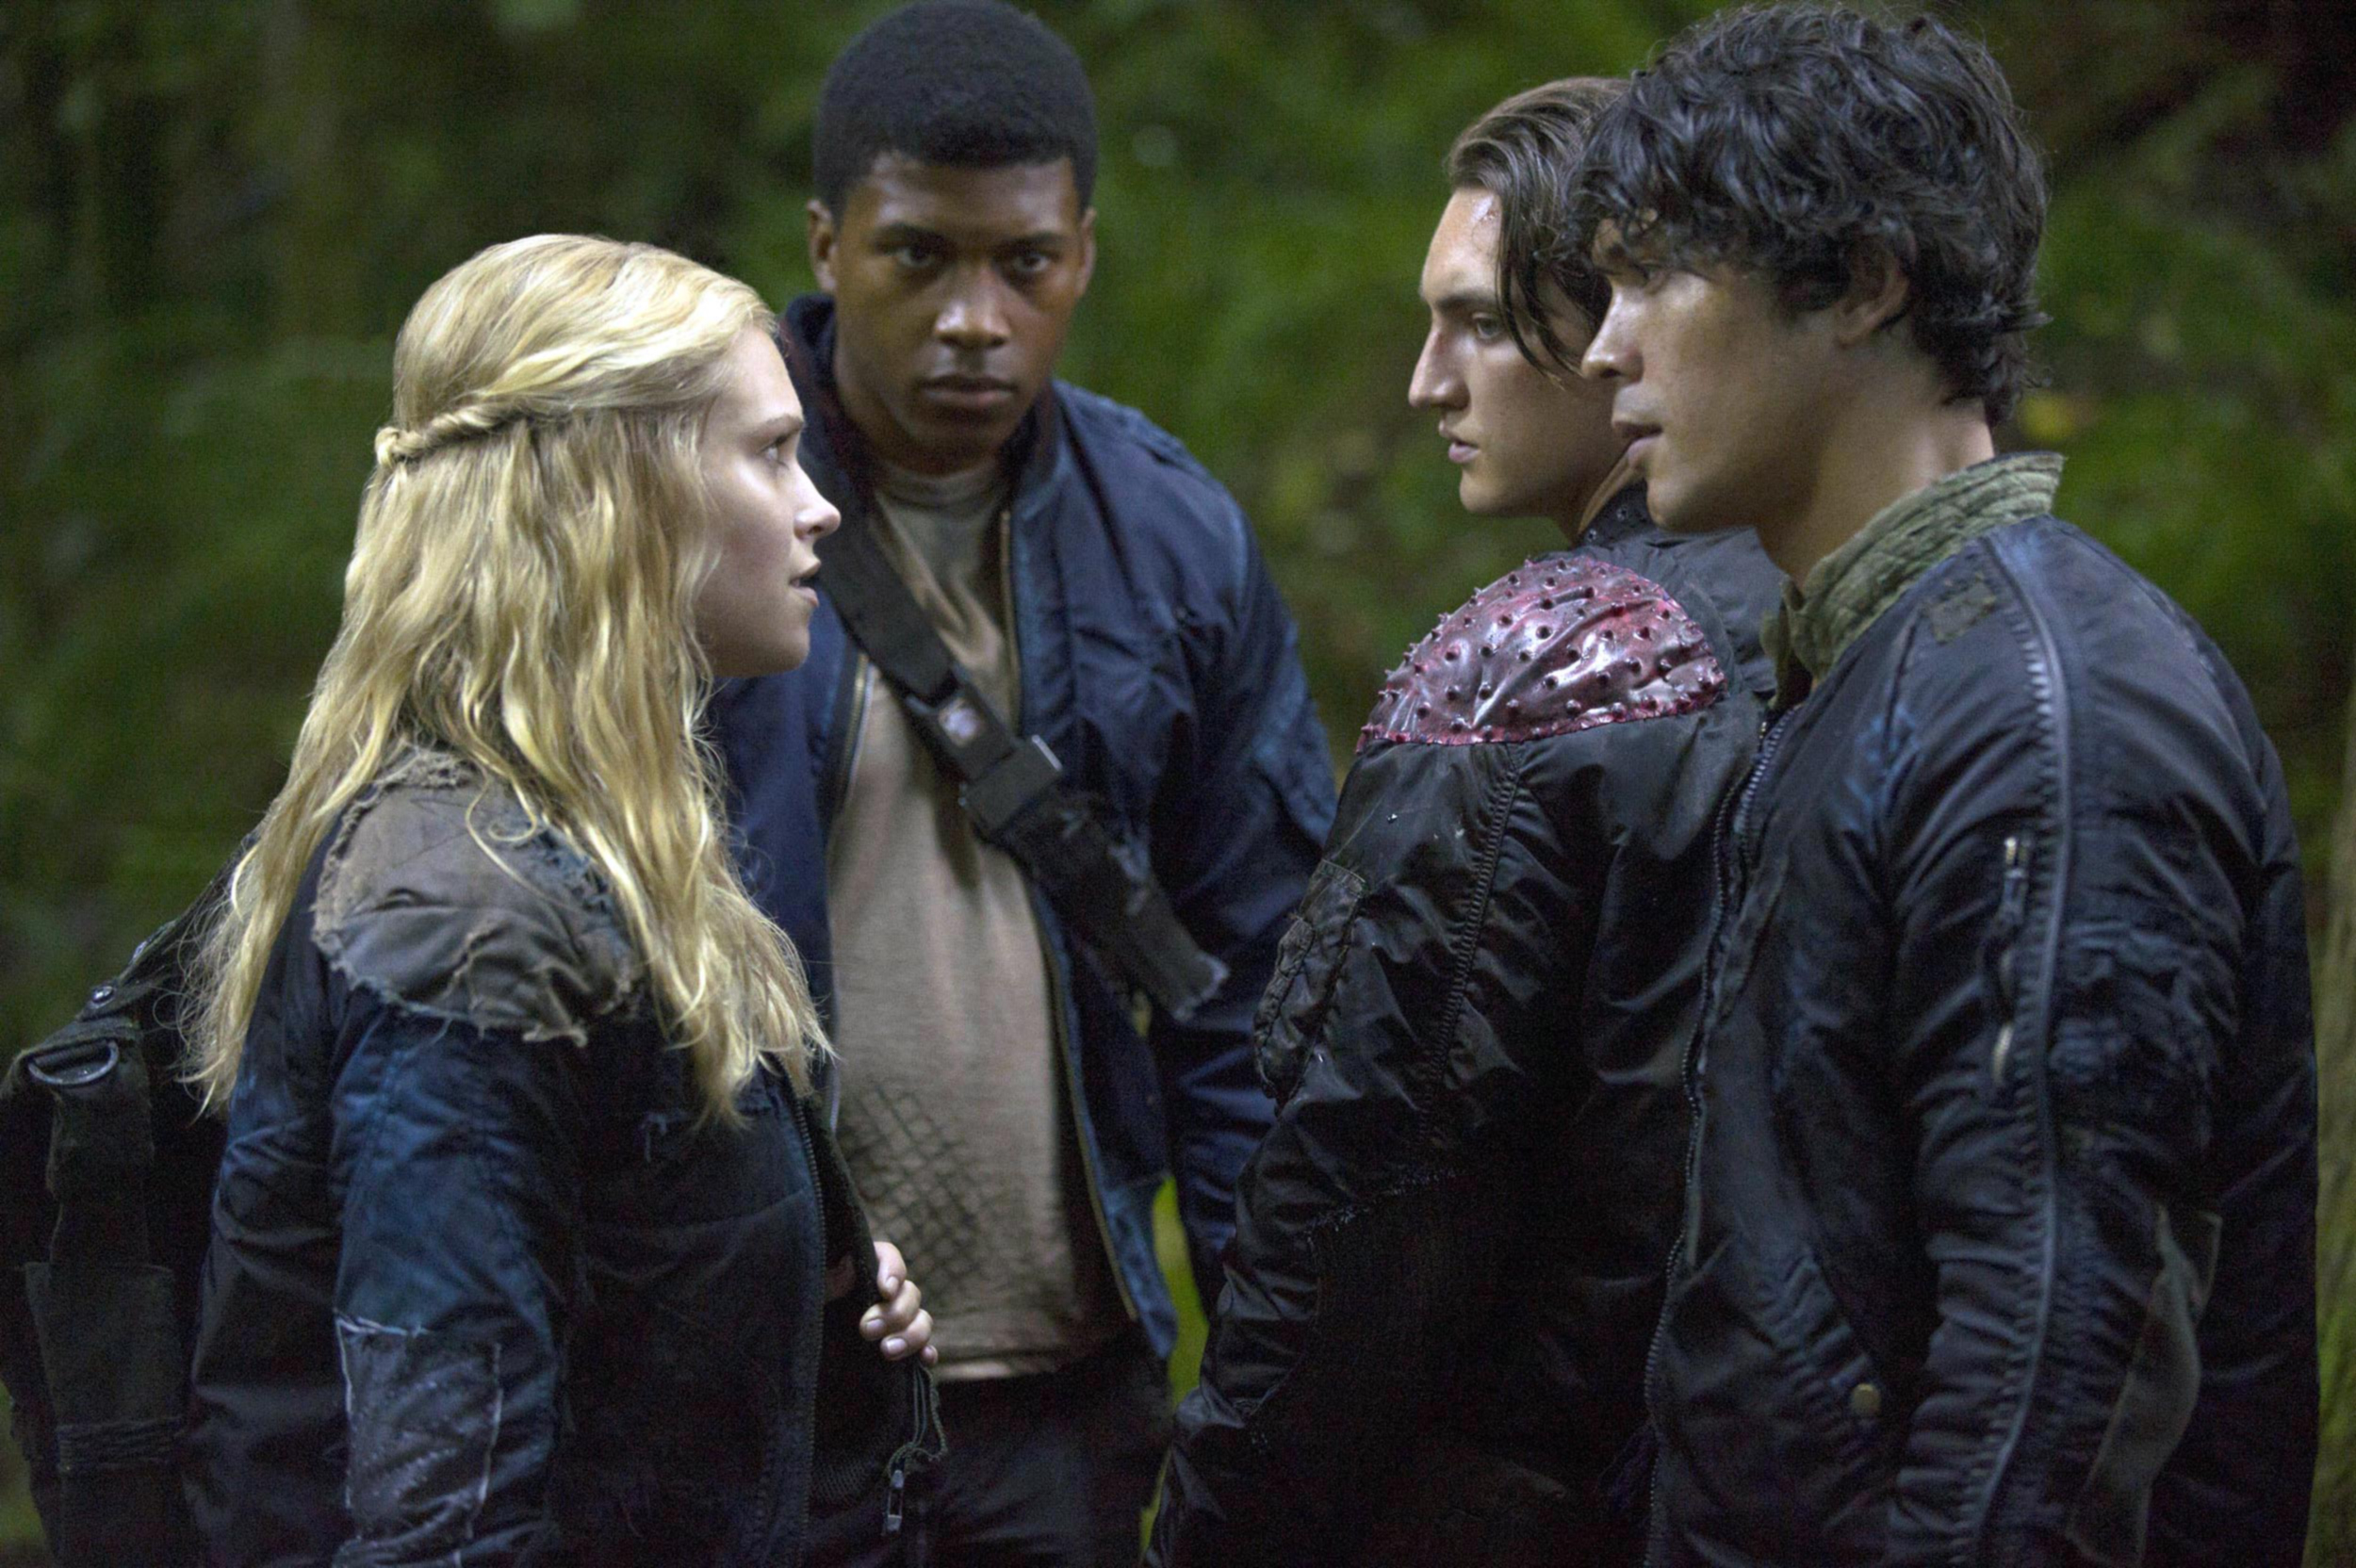 Group of characters from a TV show in a tense discussion in a forest setting